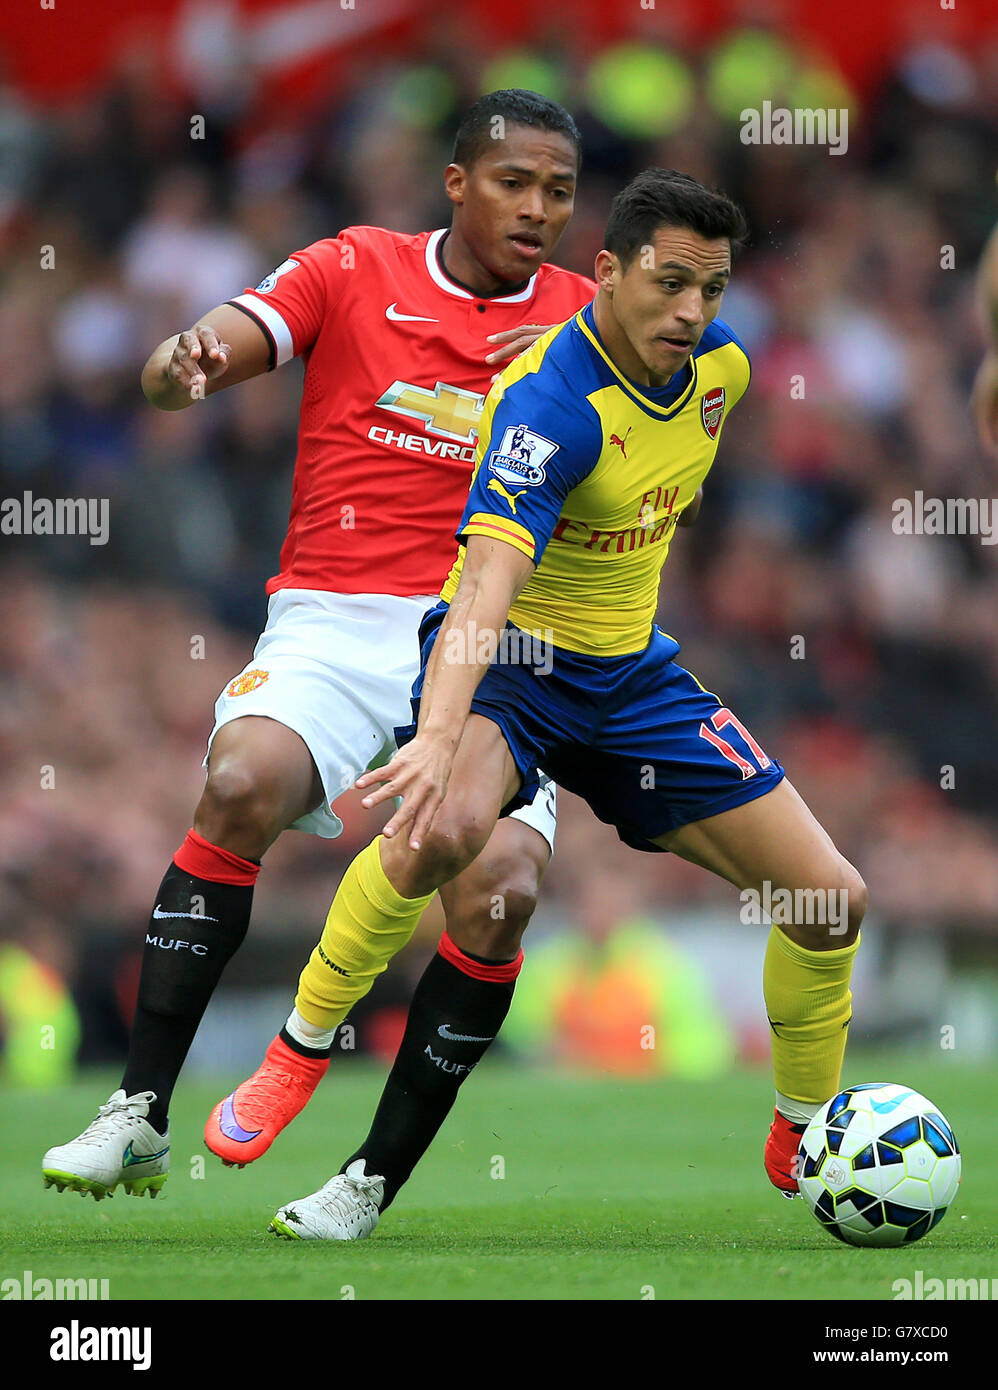 Manchester United's Luis Antonio Valencia (left) and Arsenal's Alexis Sanchez in action during the Barclays Premier League match at Old Trafford, Manchester. PRESS ASSOCIATION Photo. Picture date: Sunday May 17, 2015. See PA story SOCCER Man Utd. Photo credit should read: Nick Potts/PA Wire. Stock Photo